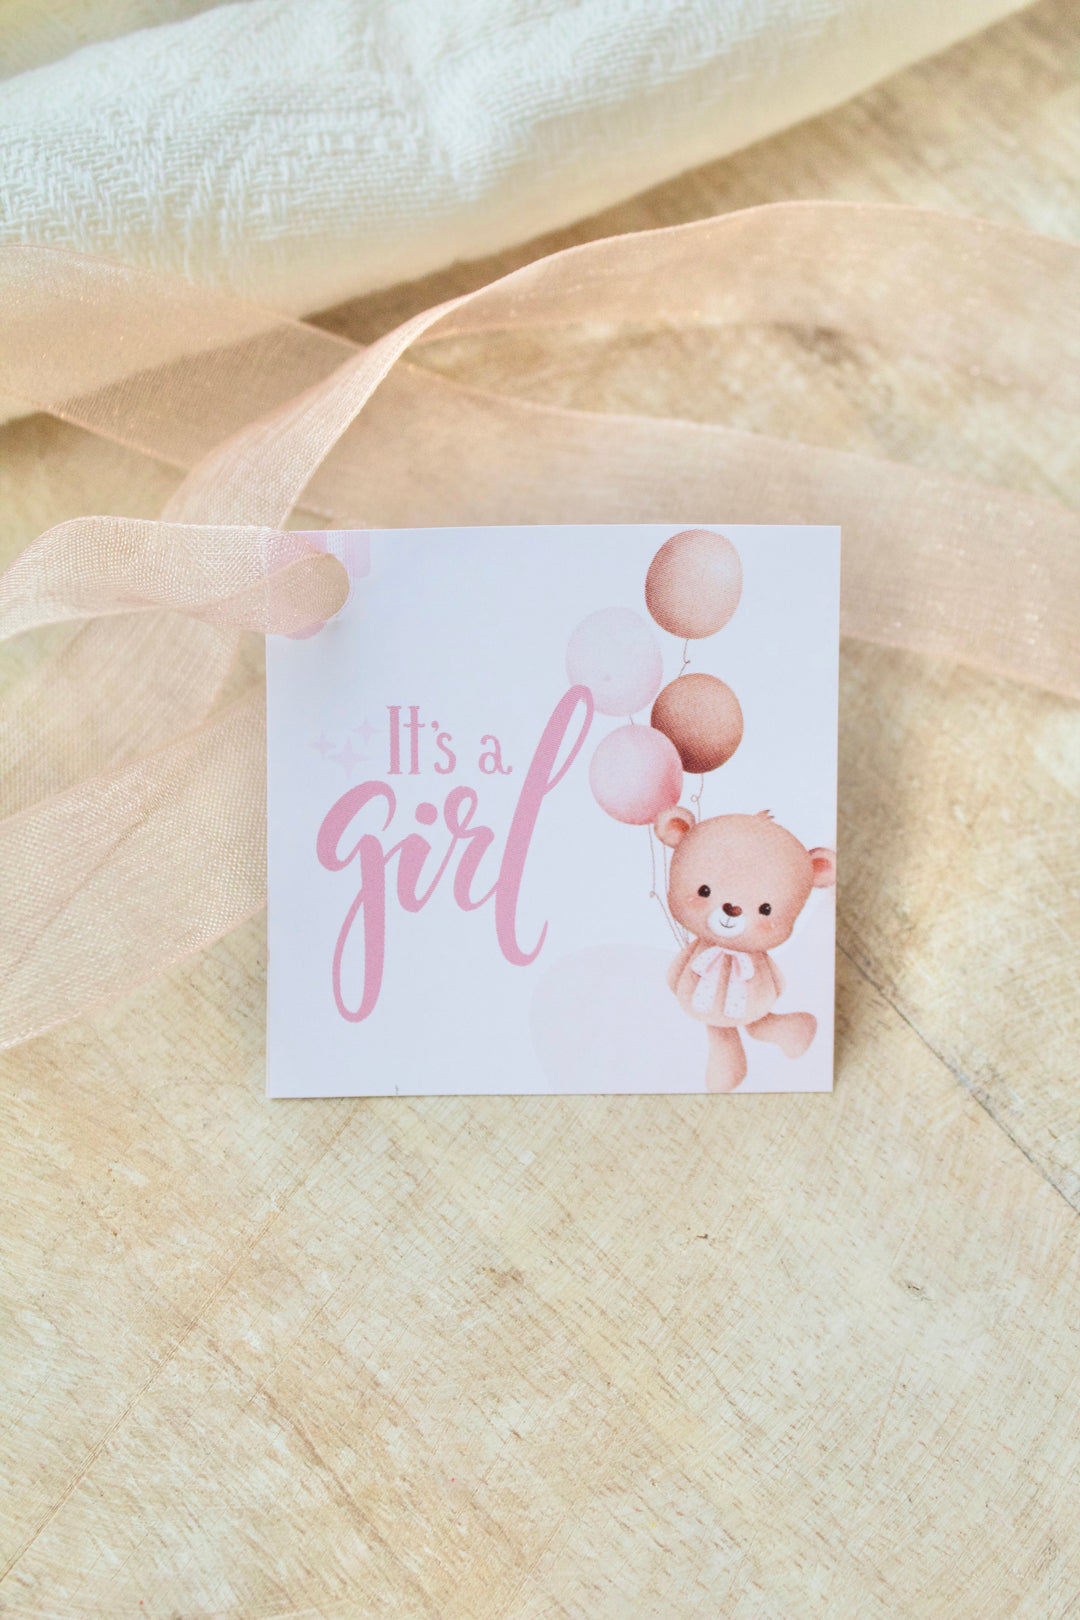 It's a girl teddy bear - tags for cookies - 25pcs - WITHOUT HOLES